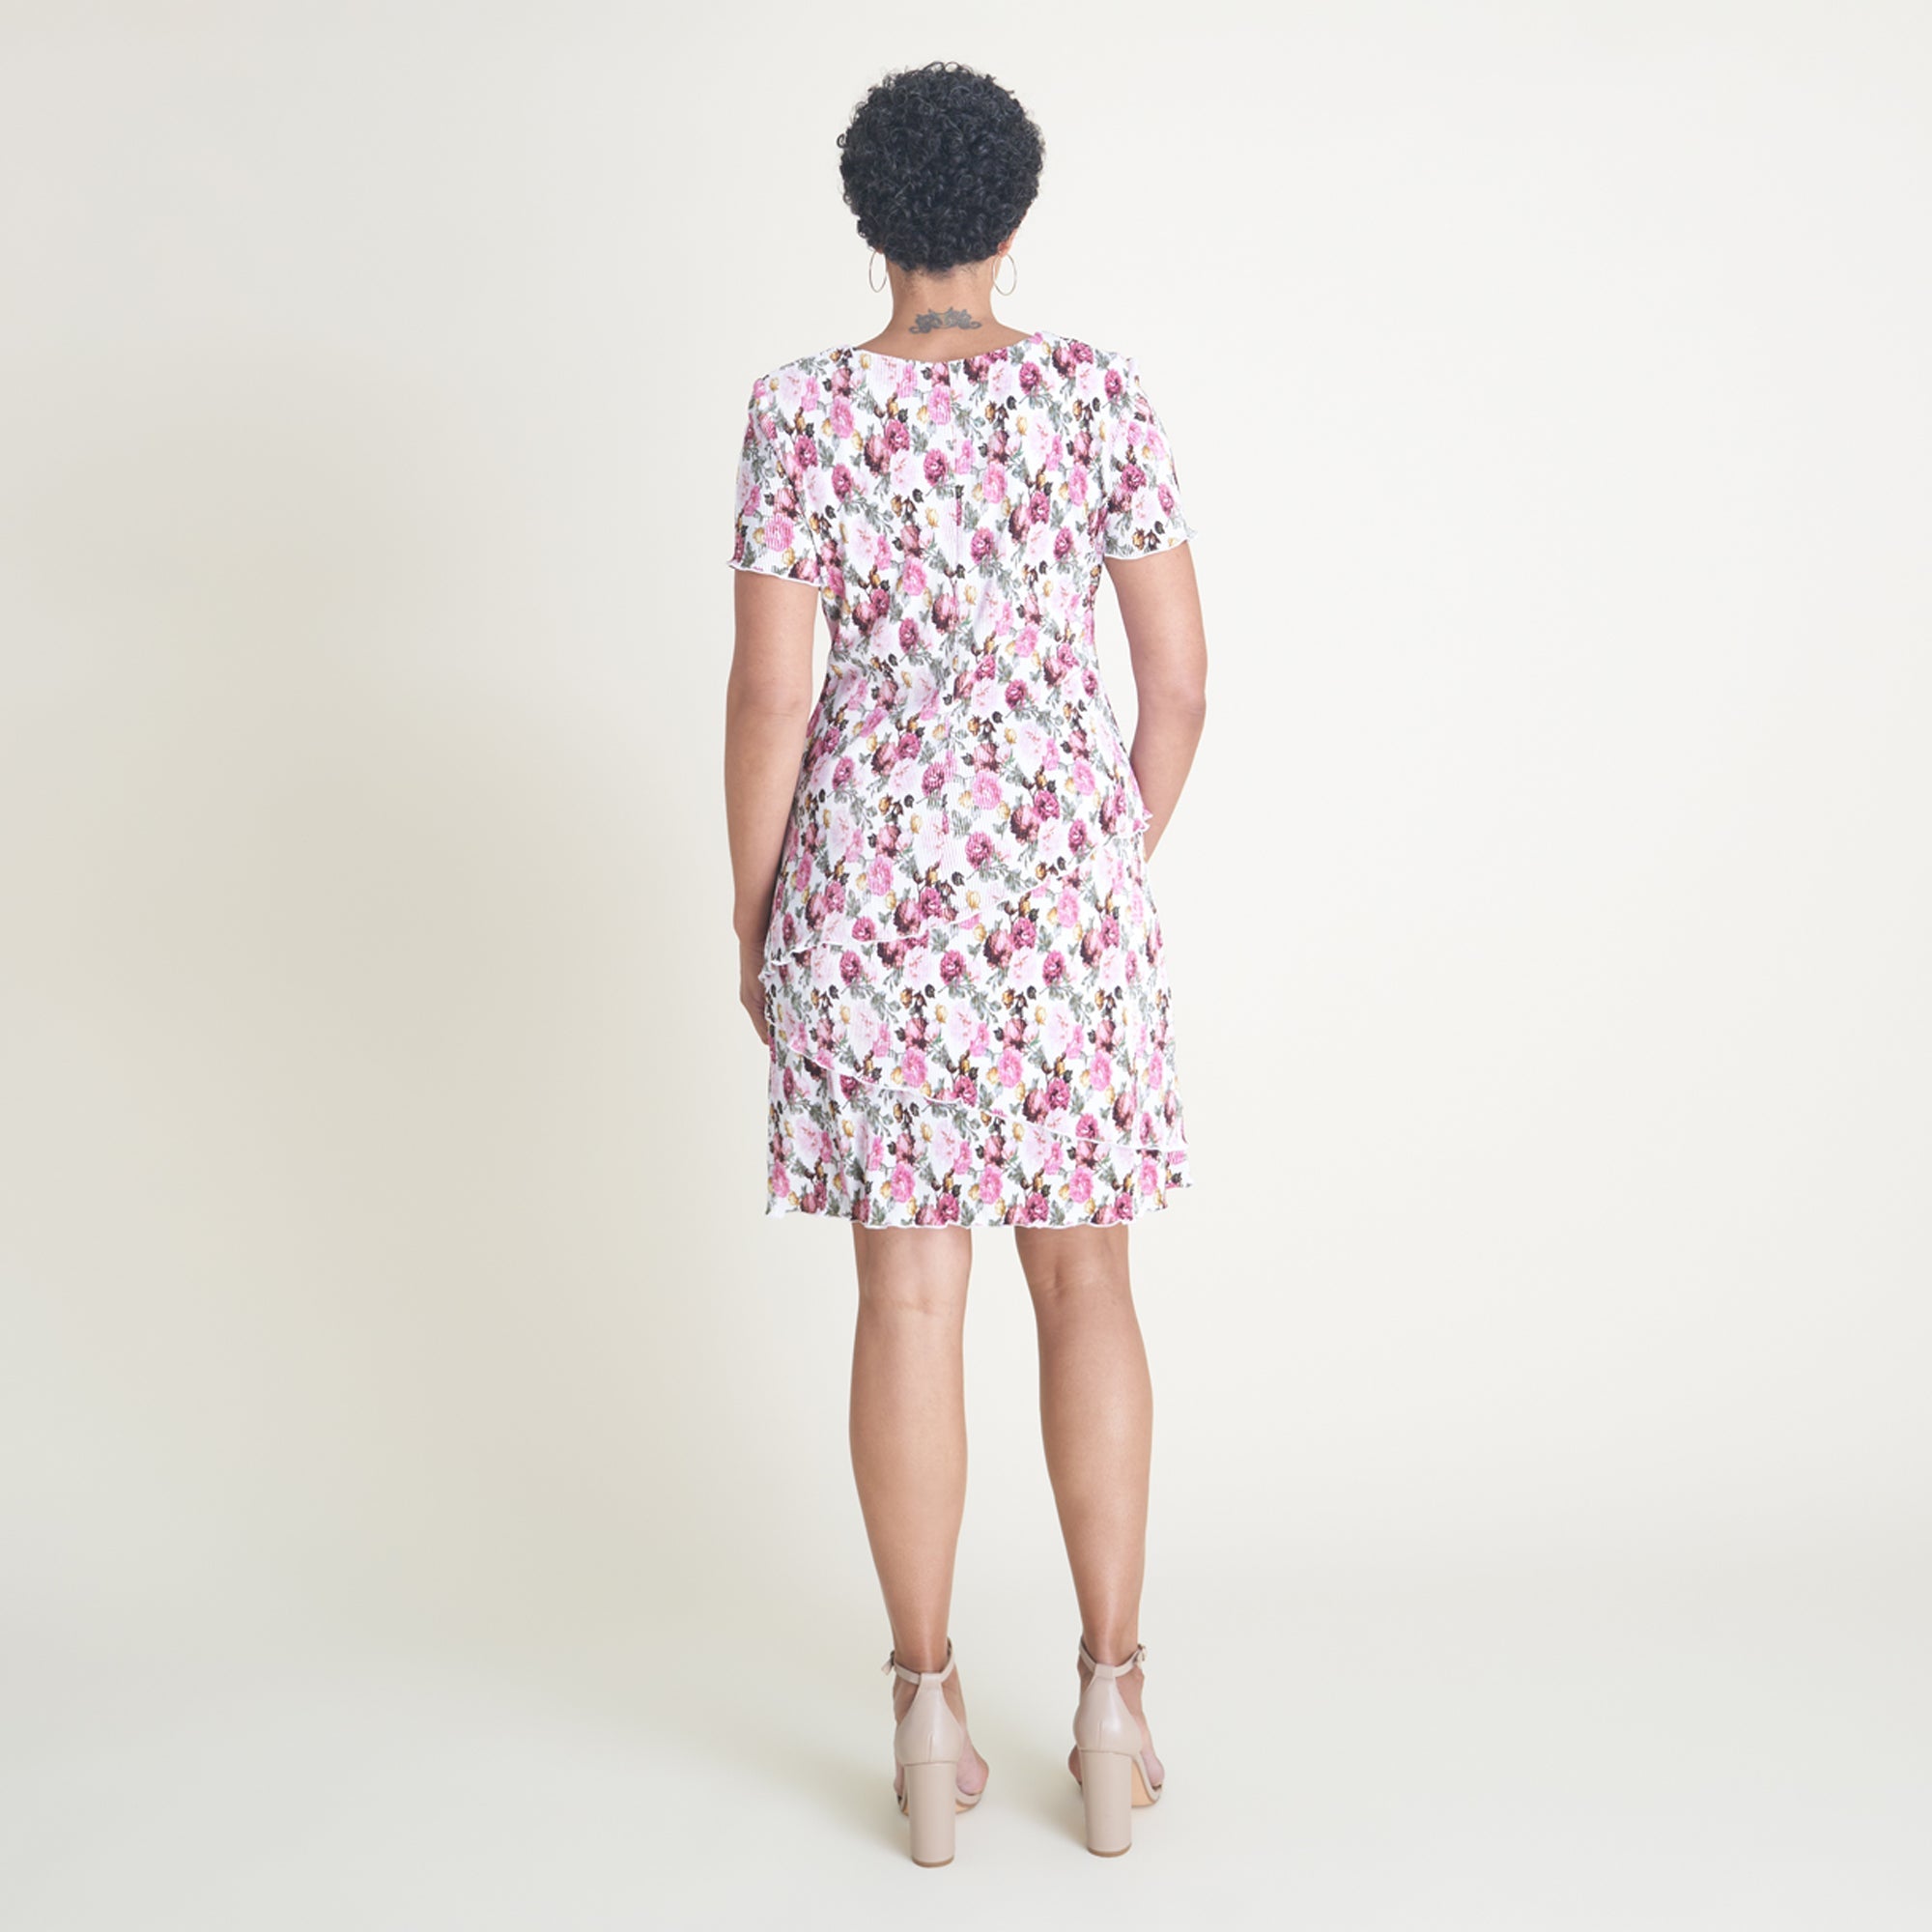 Woman posing wearing Ivory/Rose Penny Floral Bodre Sheath Dress from Connected Apparel